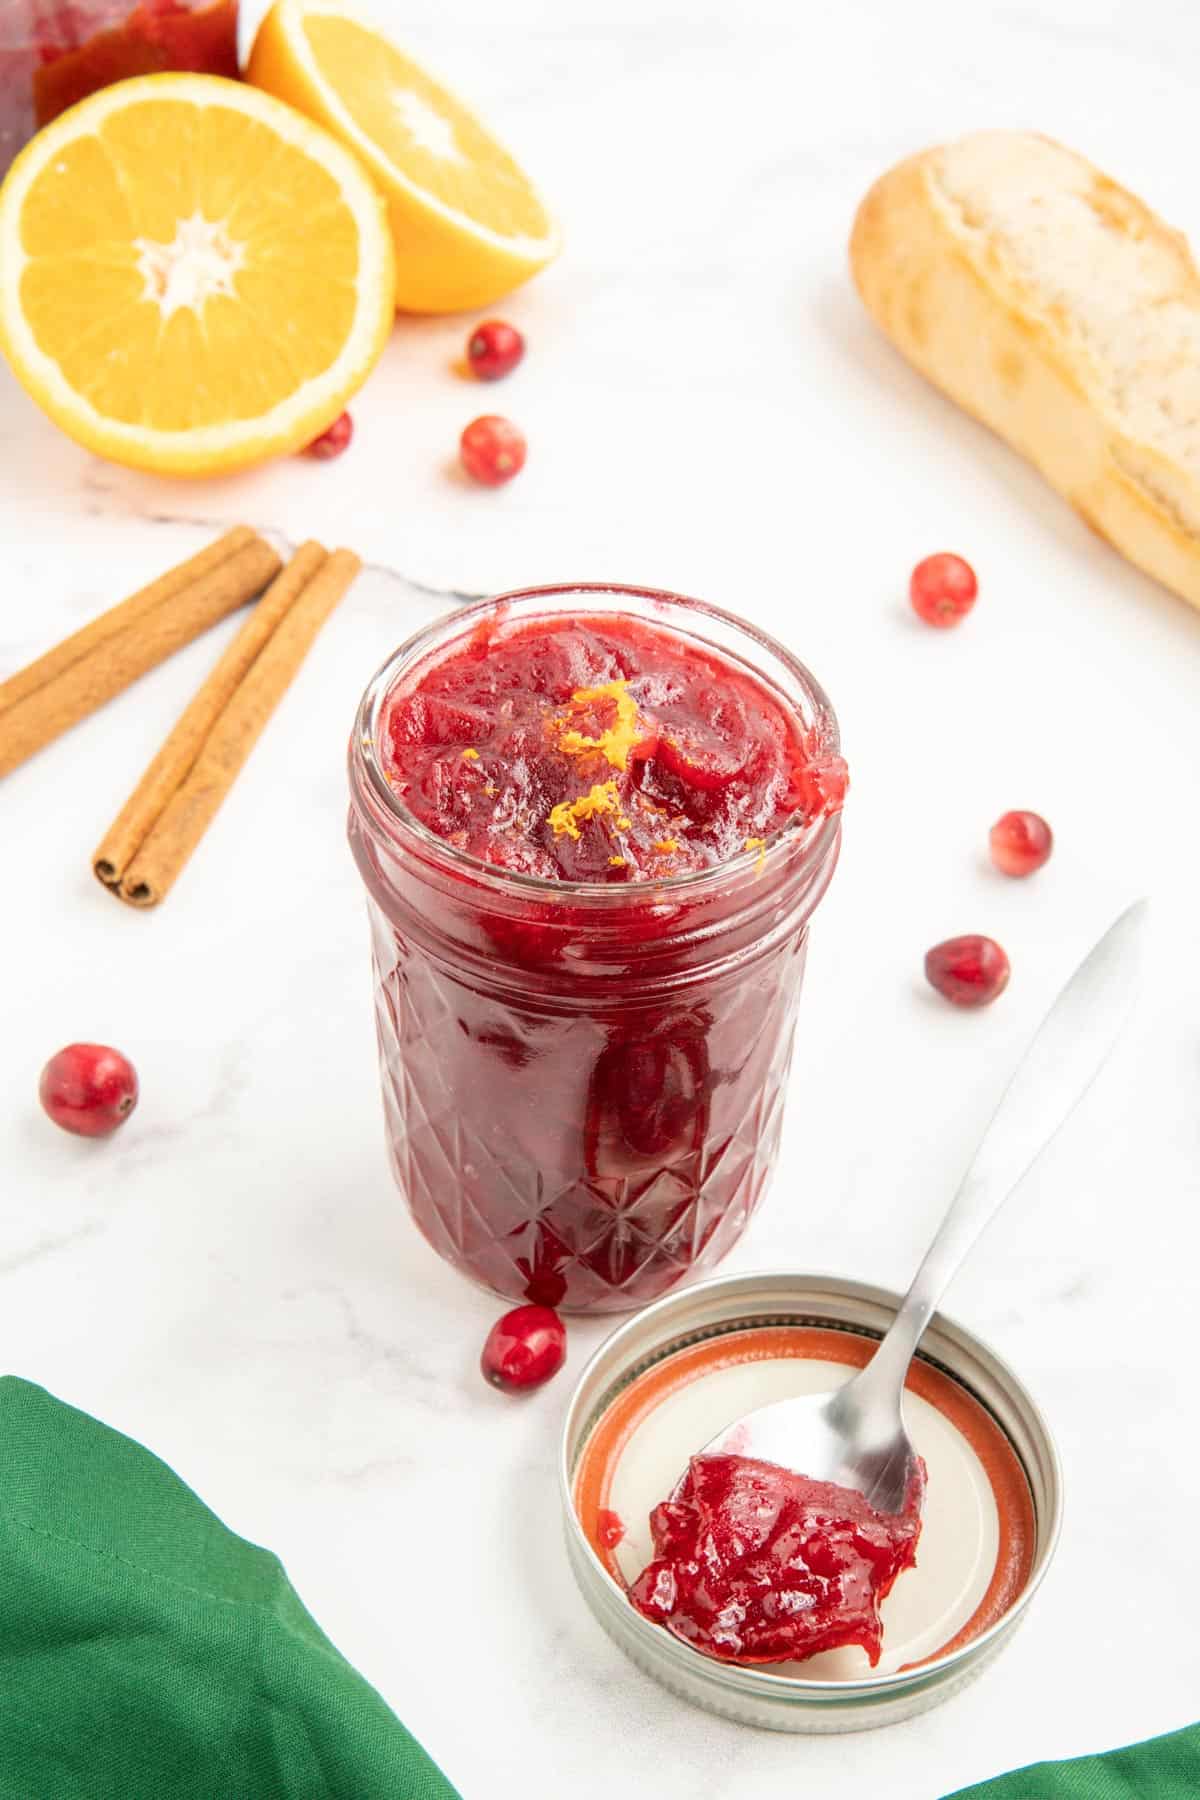 A spoonful of cranberry sauce with orange juice next to a jar of cranberry sauce.